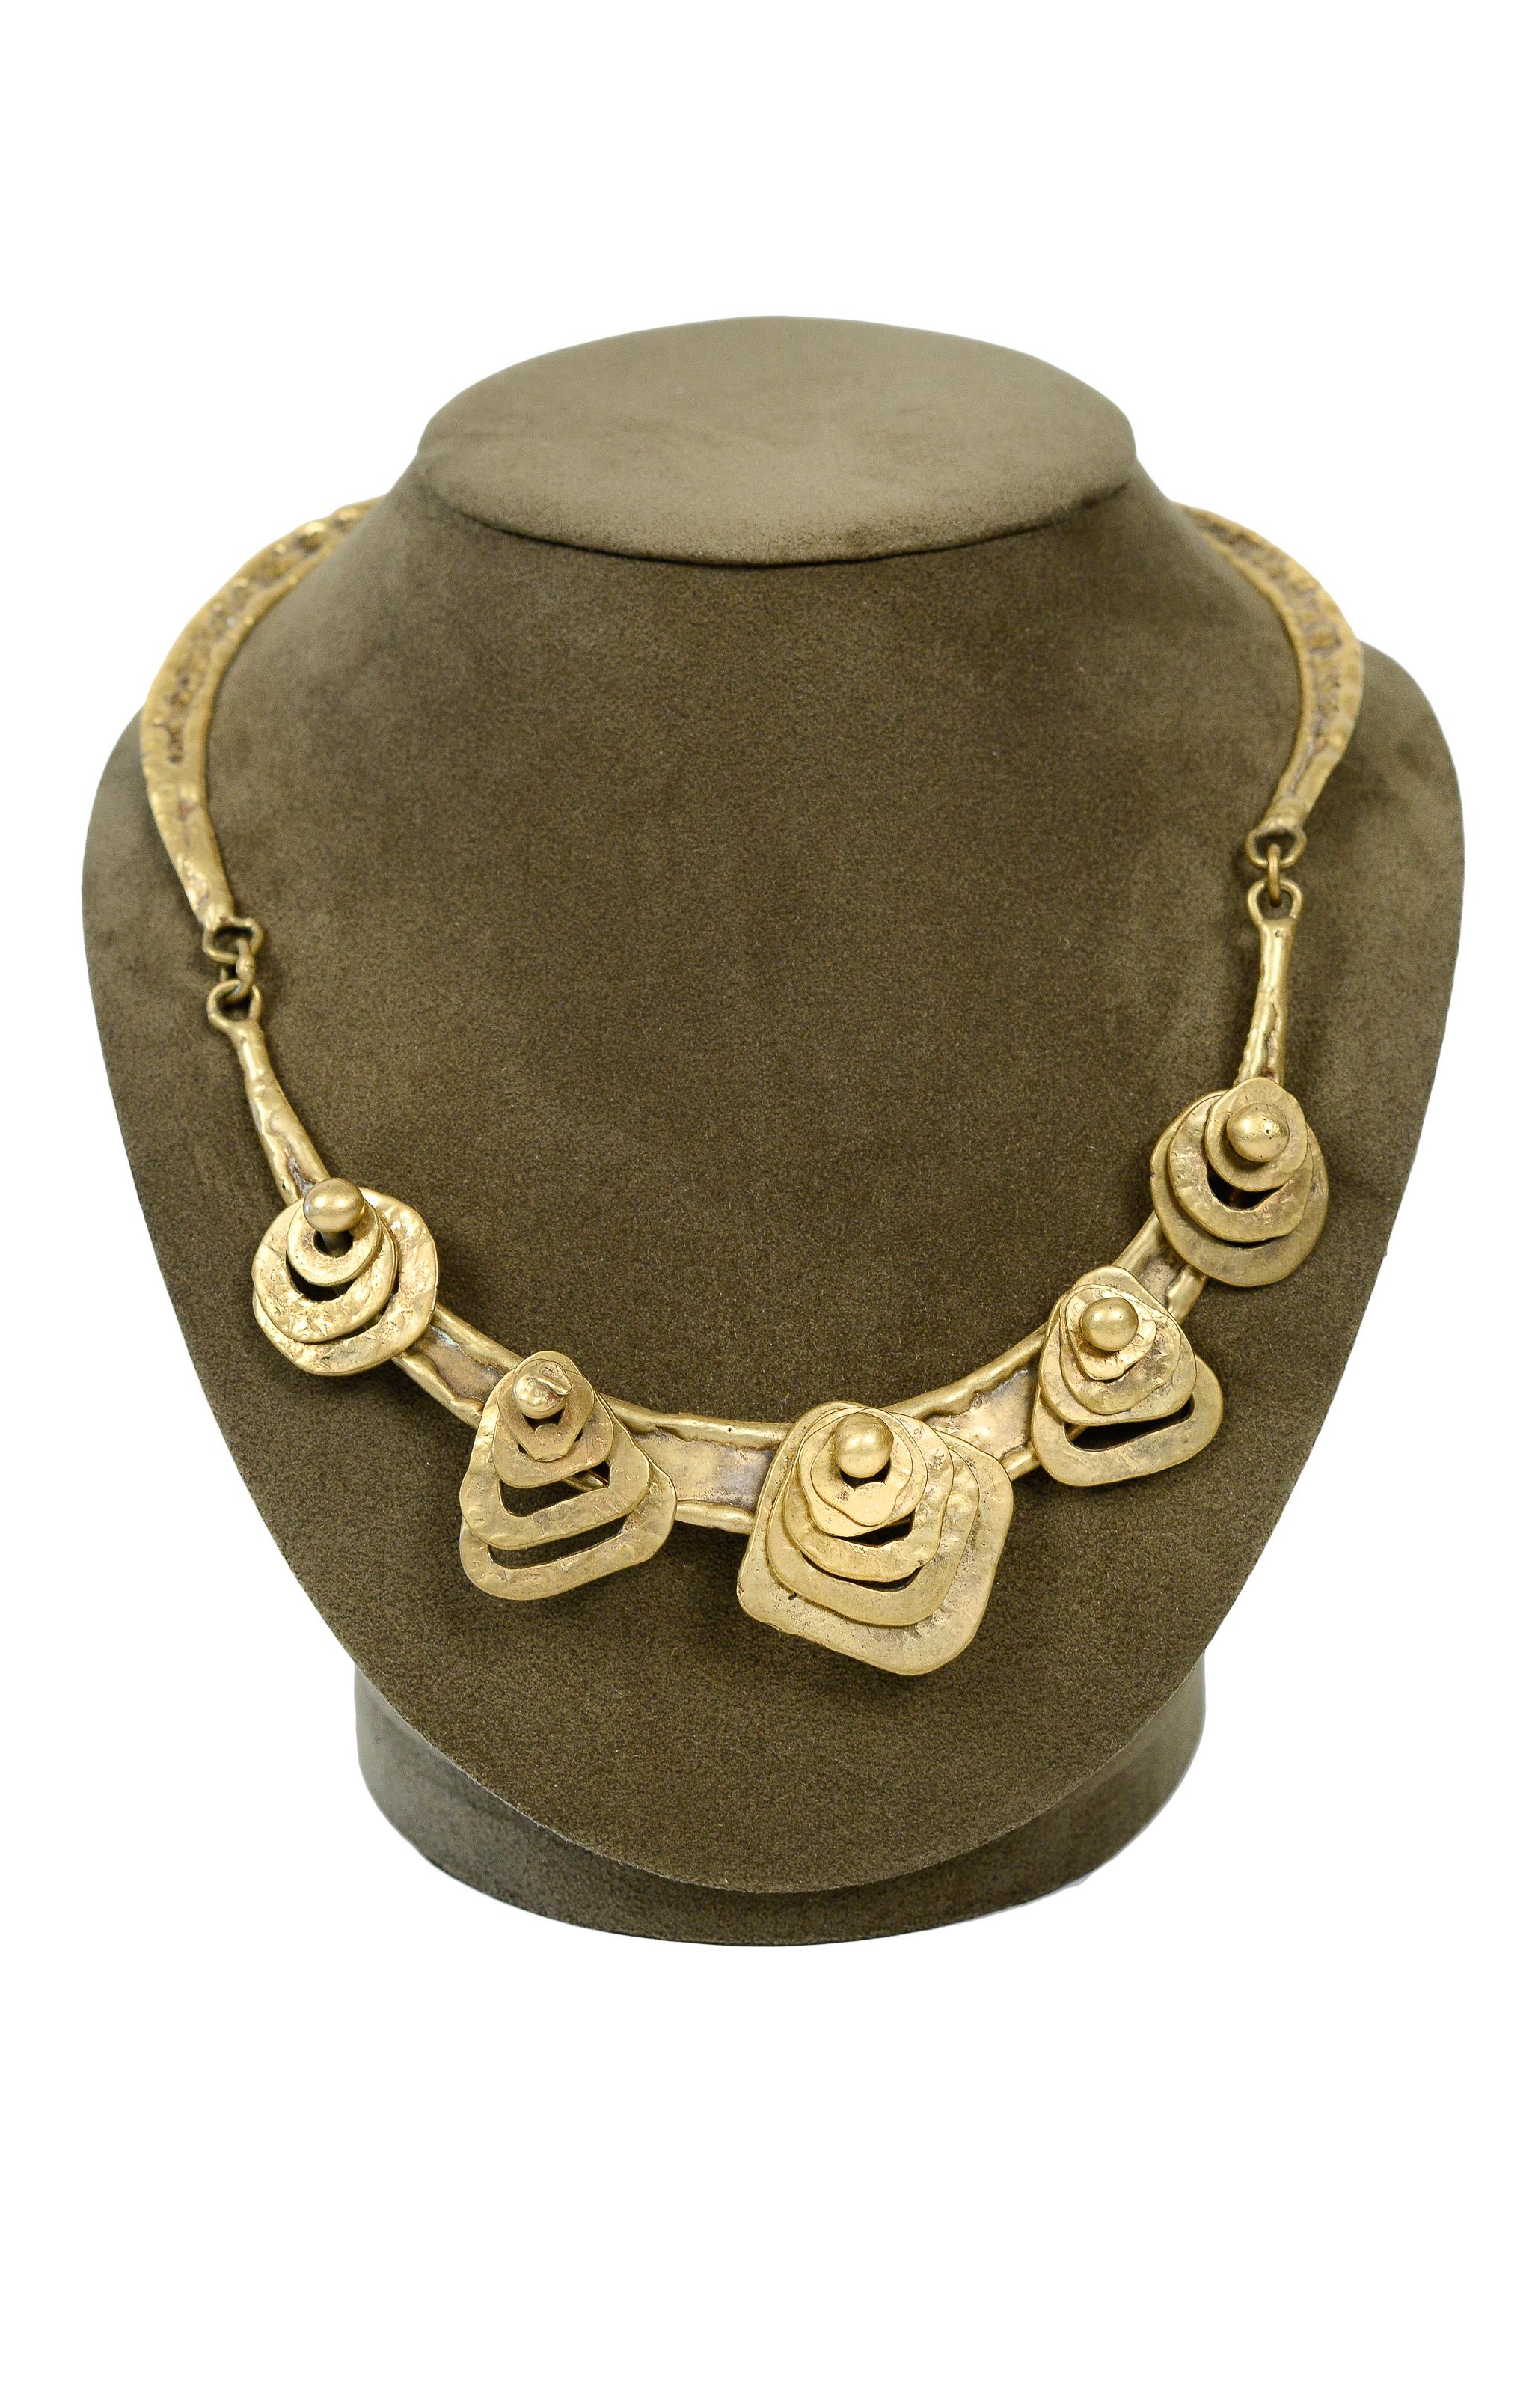 Resurrection Vintage is excited to offer a vintage Pal Kepenyes one-of-a-kind-  brutalist bronze geometric collar necklace. The necklace features irregular shaped stacked pieces of metal with metal ball fasteners, hammered collar, and handmade